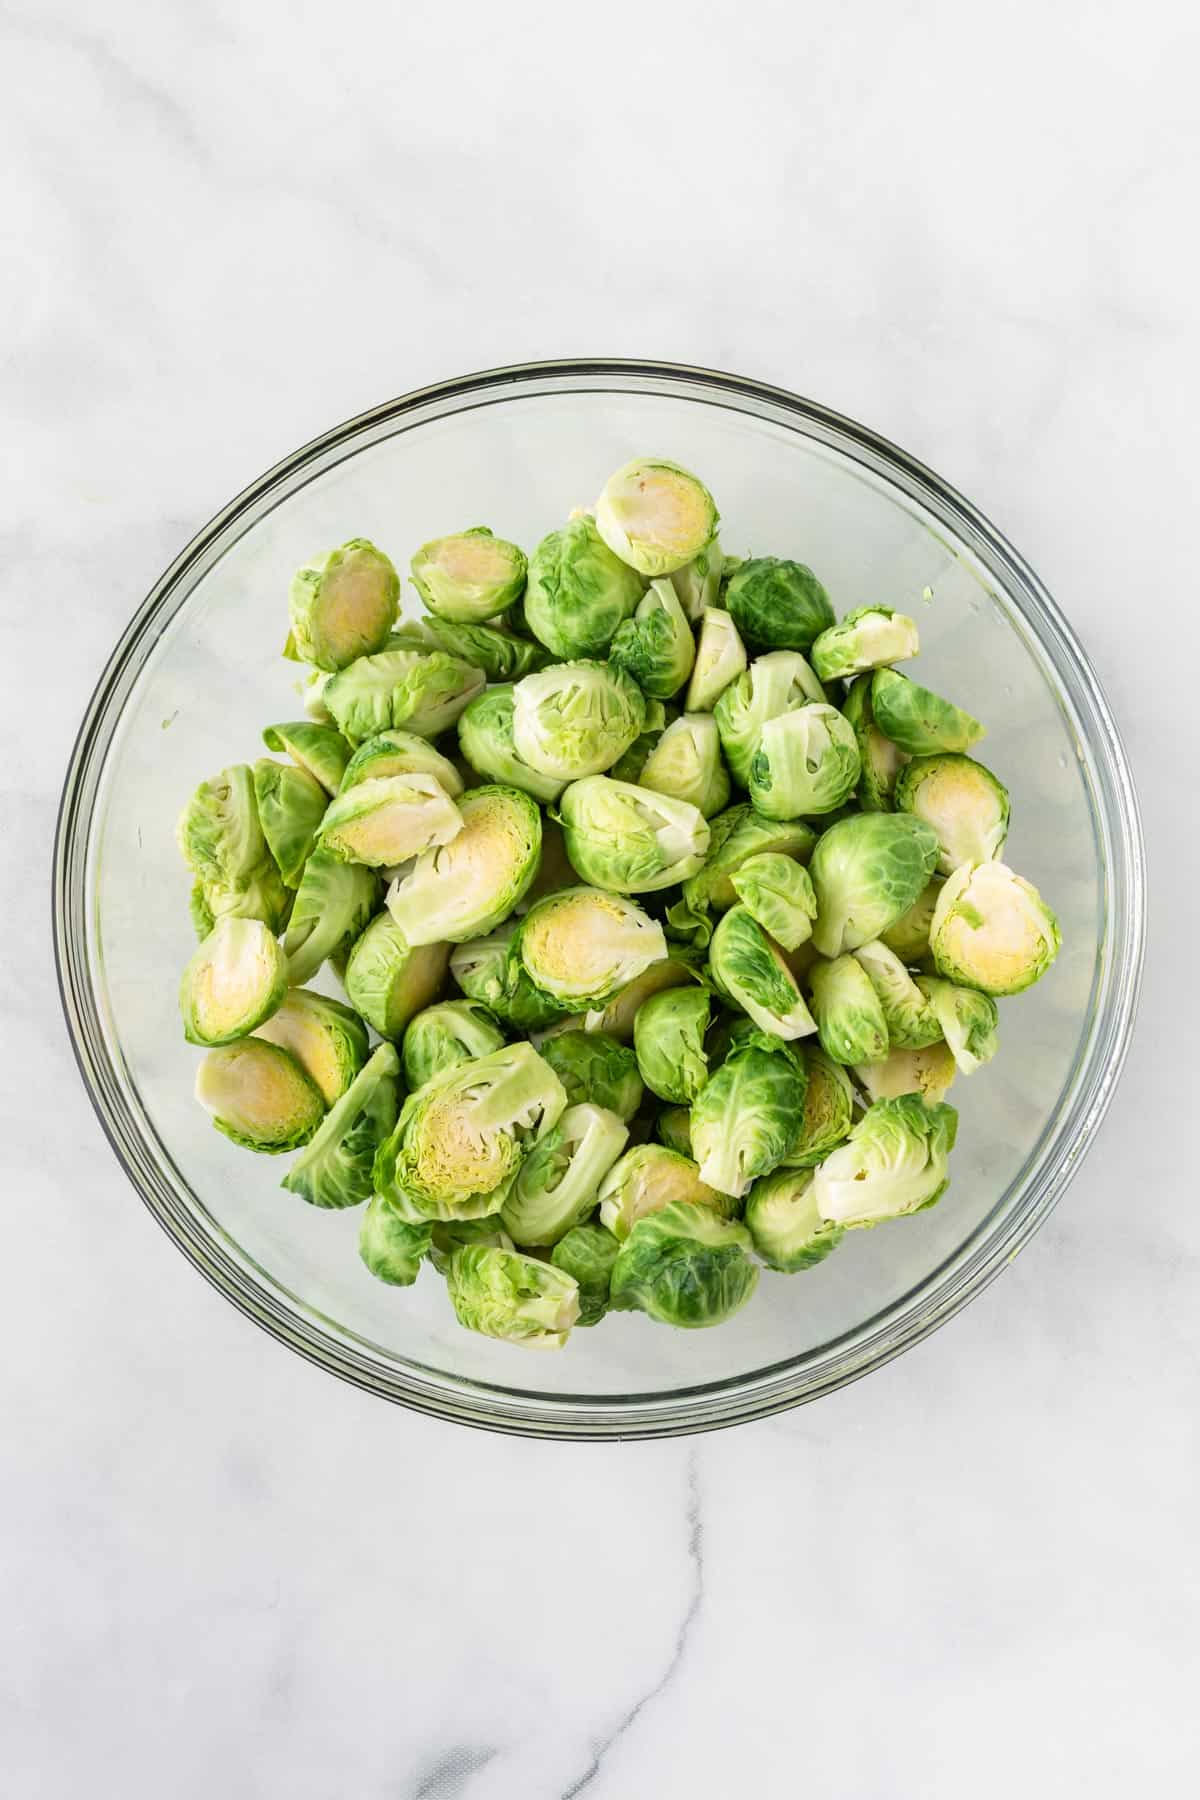 halved brussels sprouts in a glass bowl